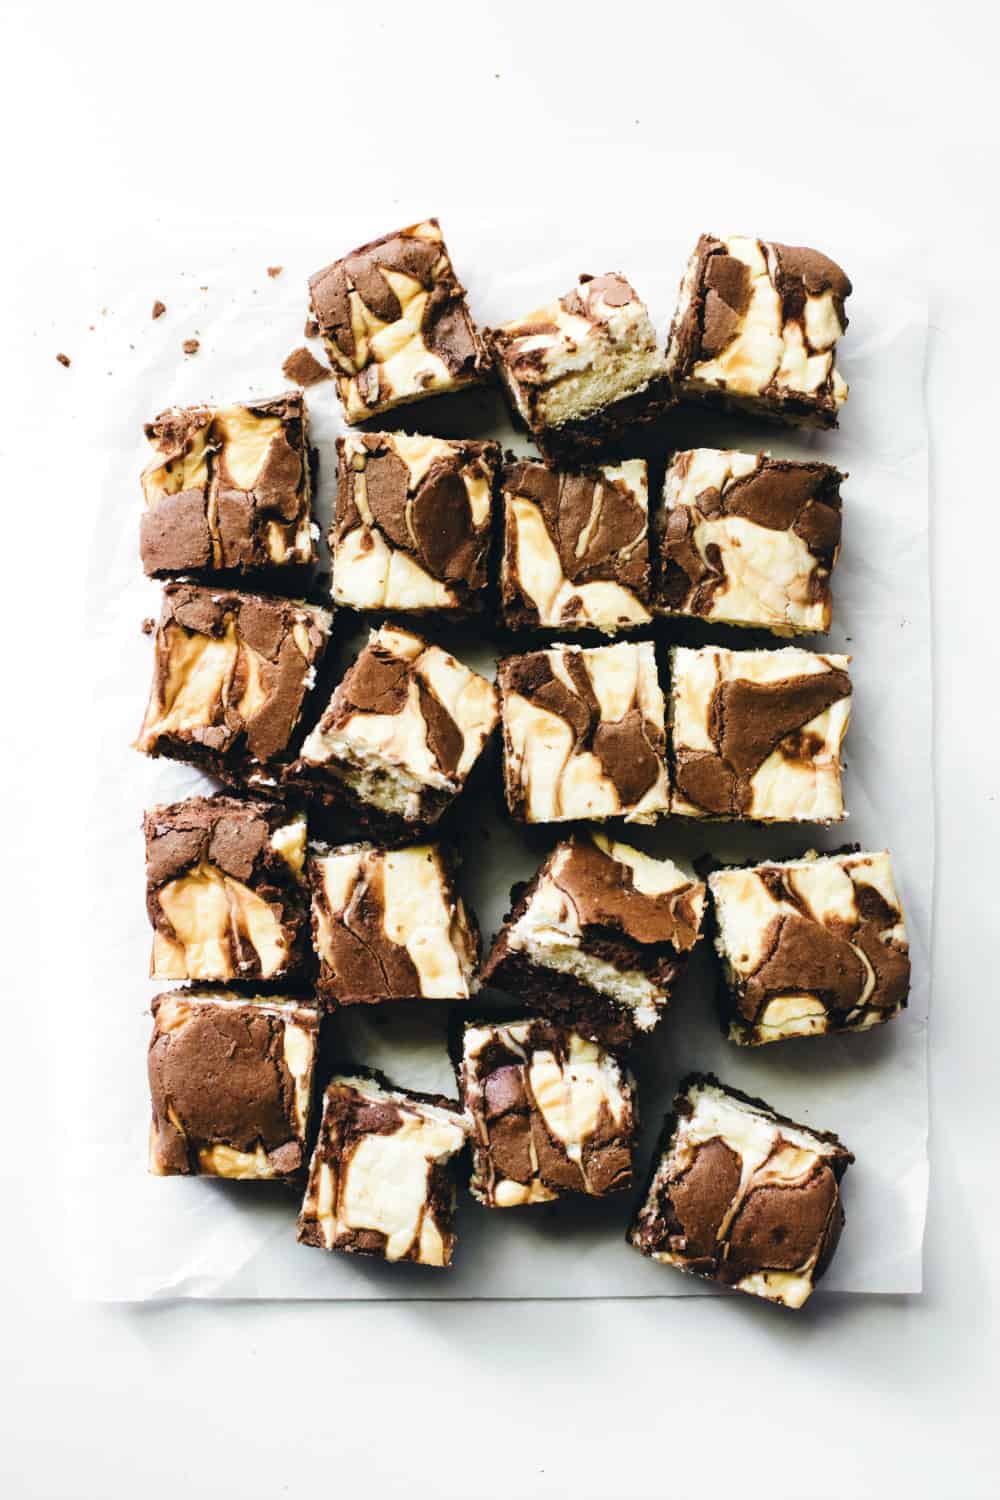 Overhead view of sliced tiramisu brownies on parchment paper